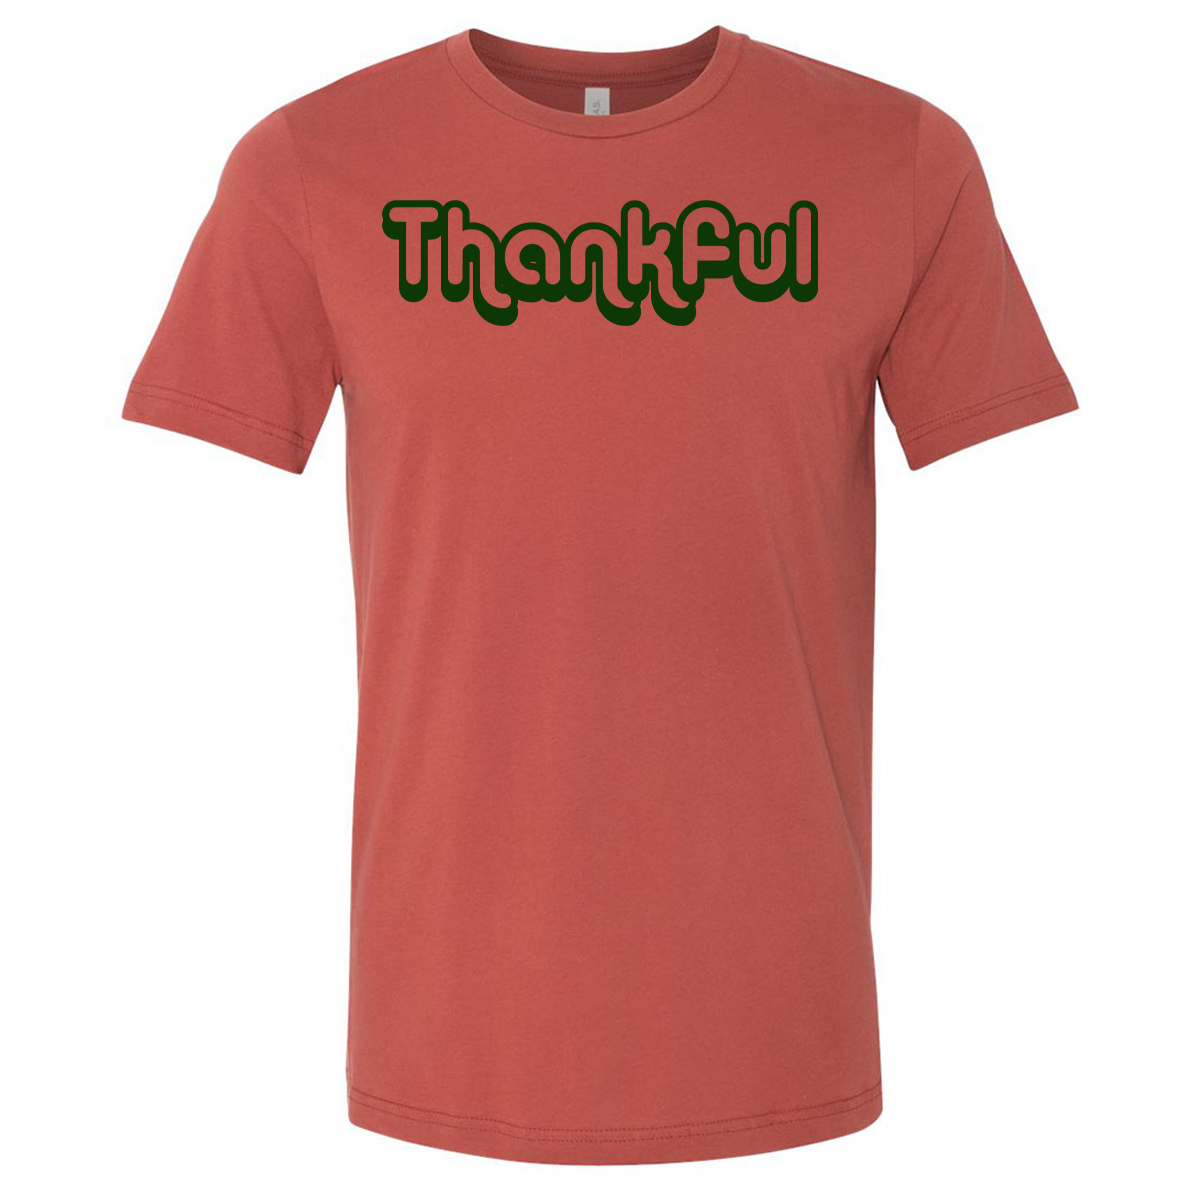 Thankful Tee - Rust - Southern Grace Creations